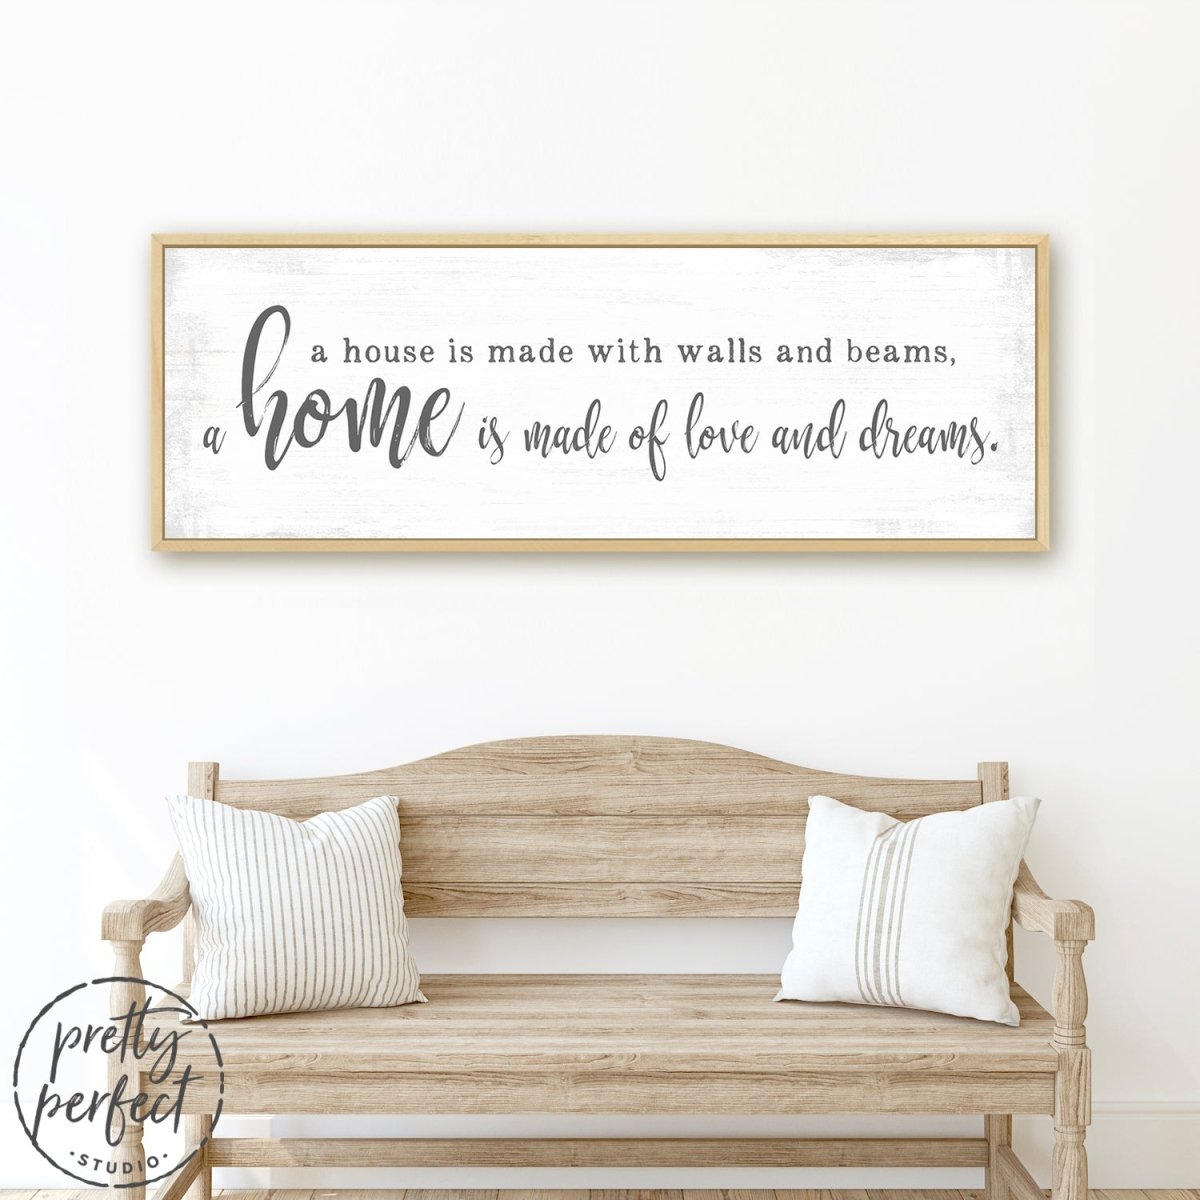 A Home Is Made Of Love and Dreams Sign Above Couch in Living Room - Pretty Perfect Studio